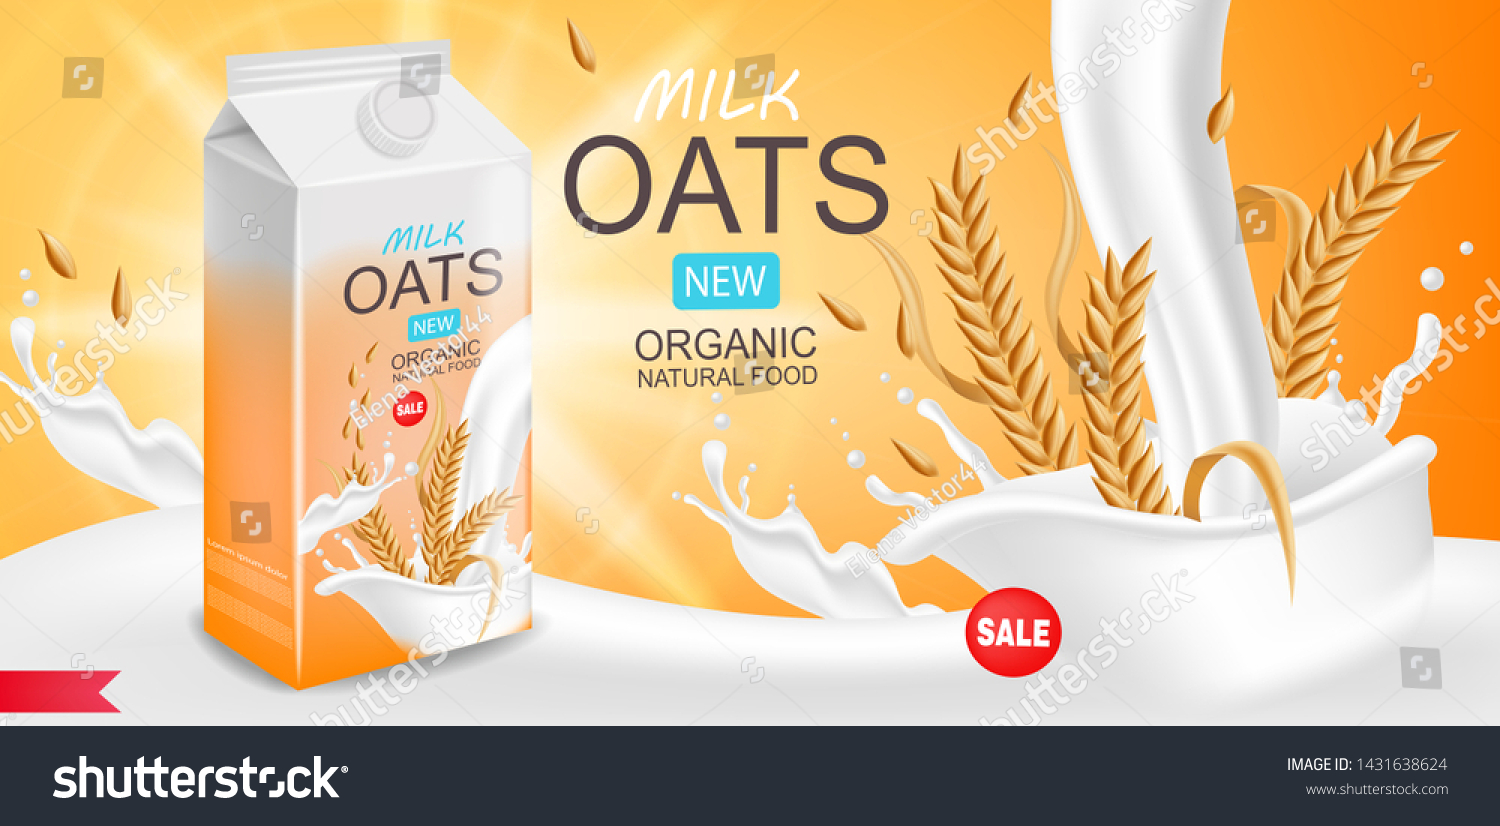 Download Oats Milk Realistic Organic Milk Packaging Stock Vector Royalty Free 1431638624 3D SVG Files Ideas | SVG, Paper Crafts, SVG File